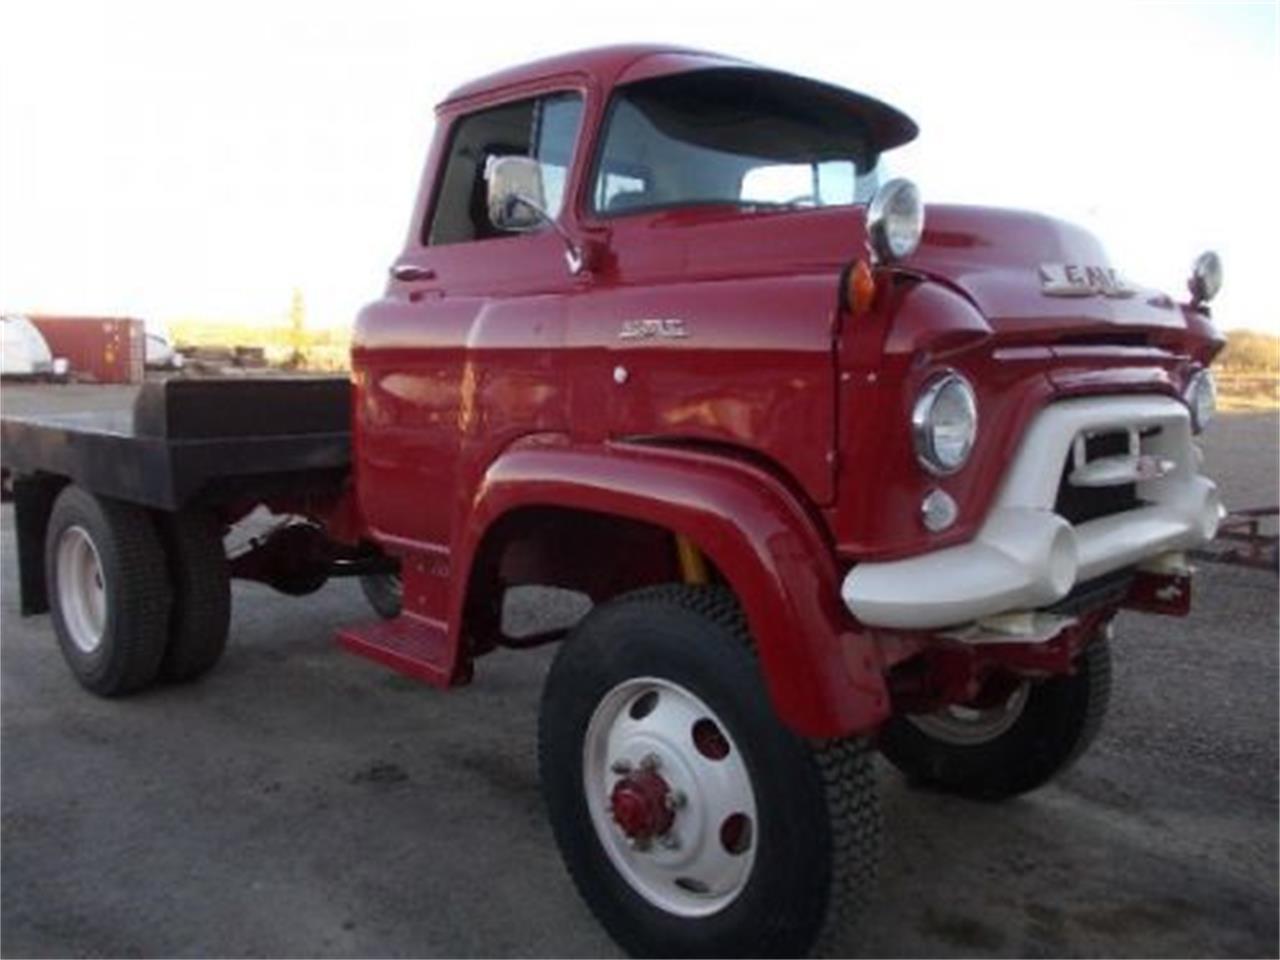 1956 Gmc Pickup For Sale In West Pittston Pa